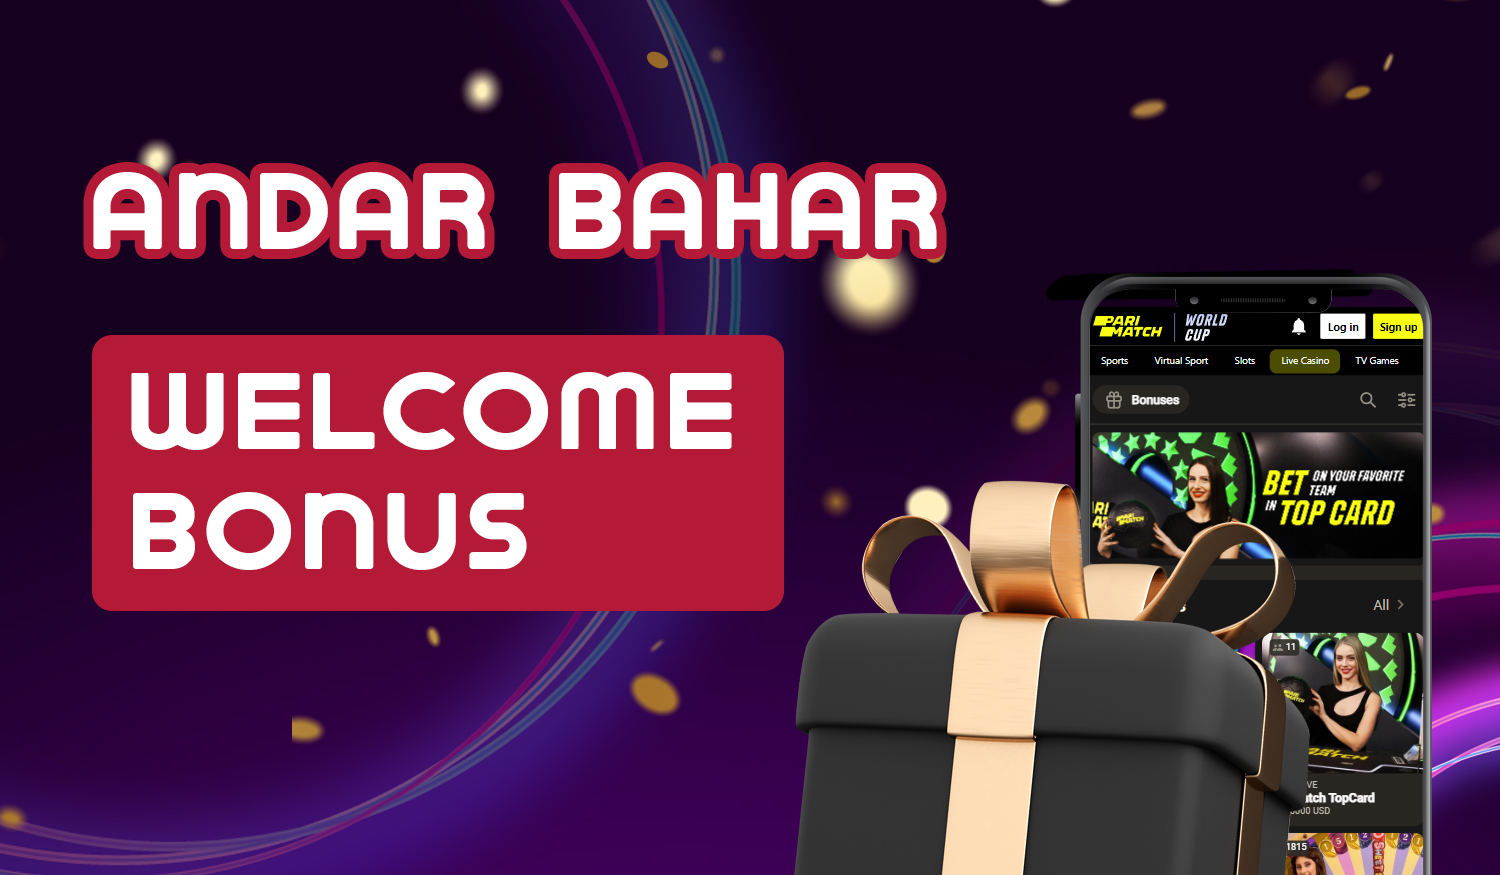 Welcome Bonus from Parimatch which will be given to all new users of the casino section